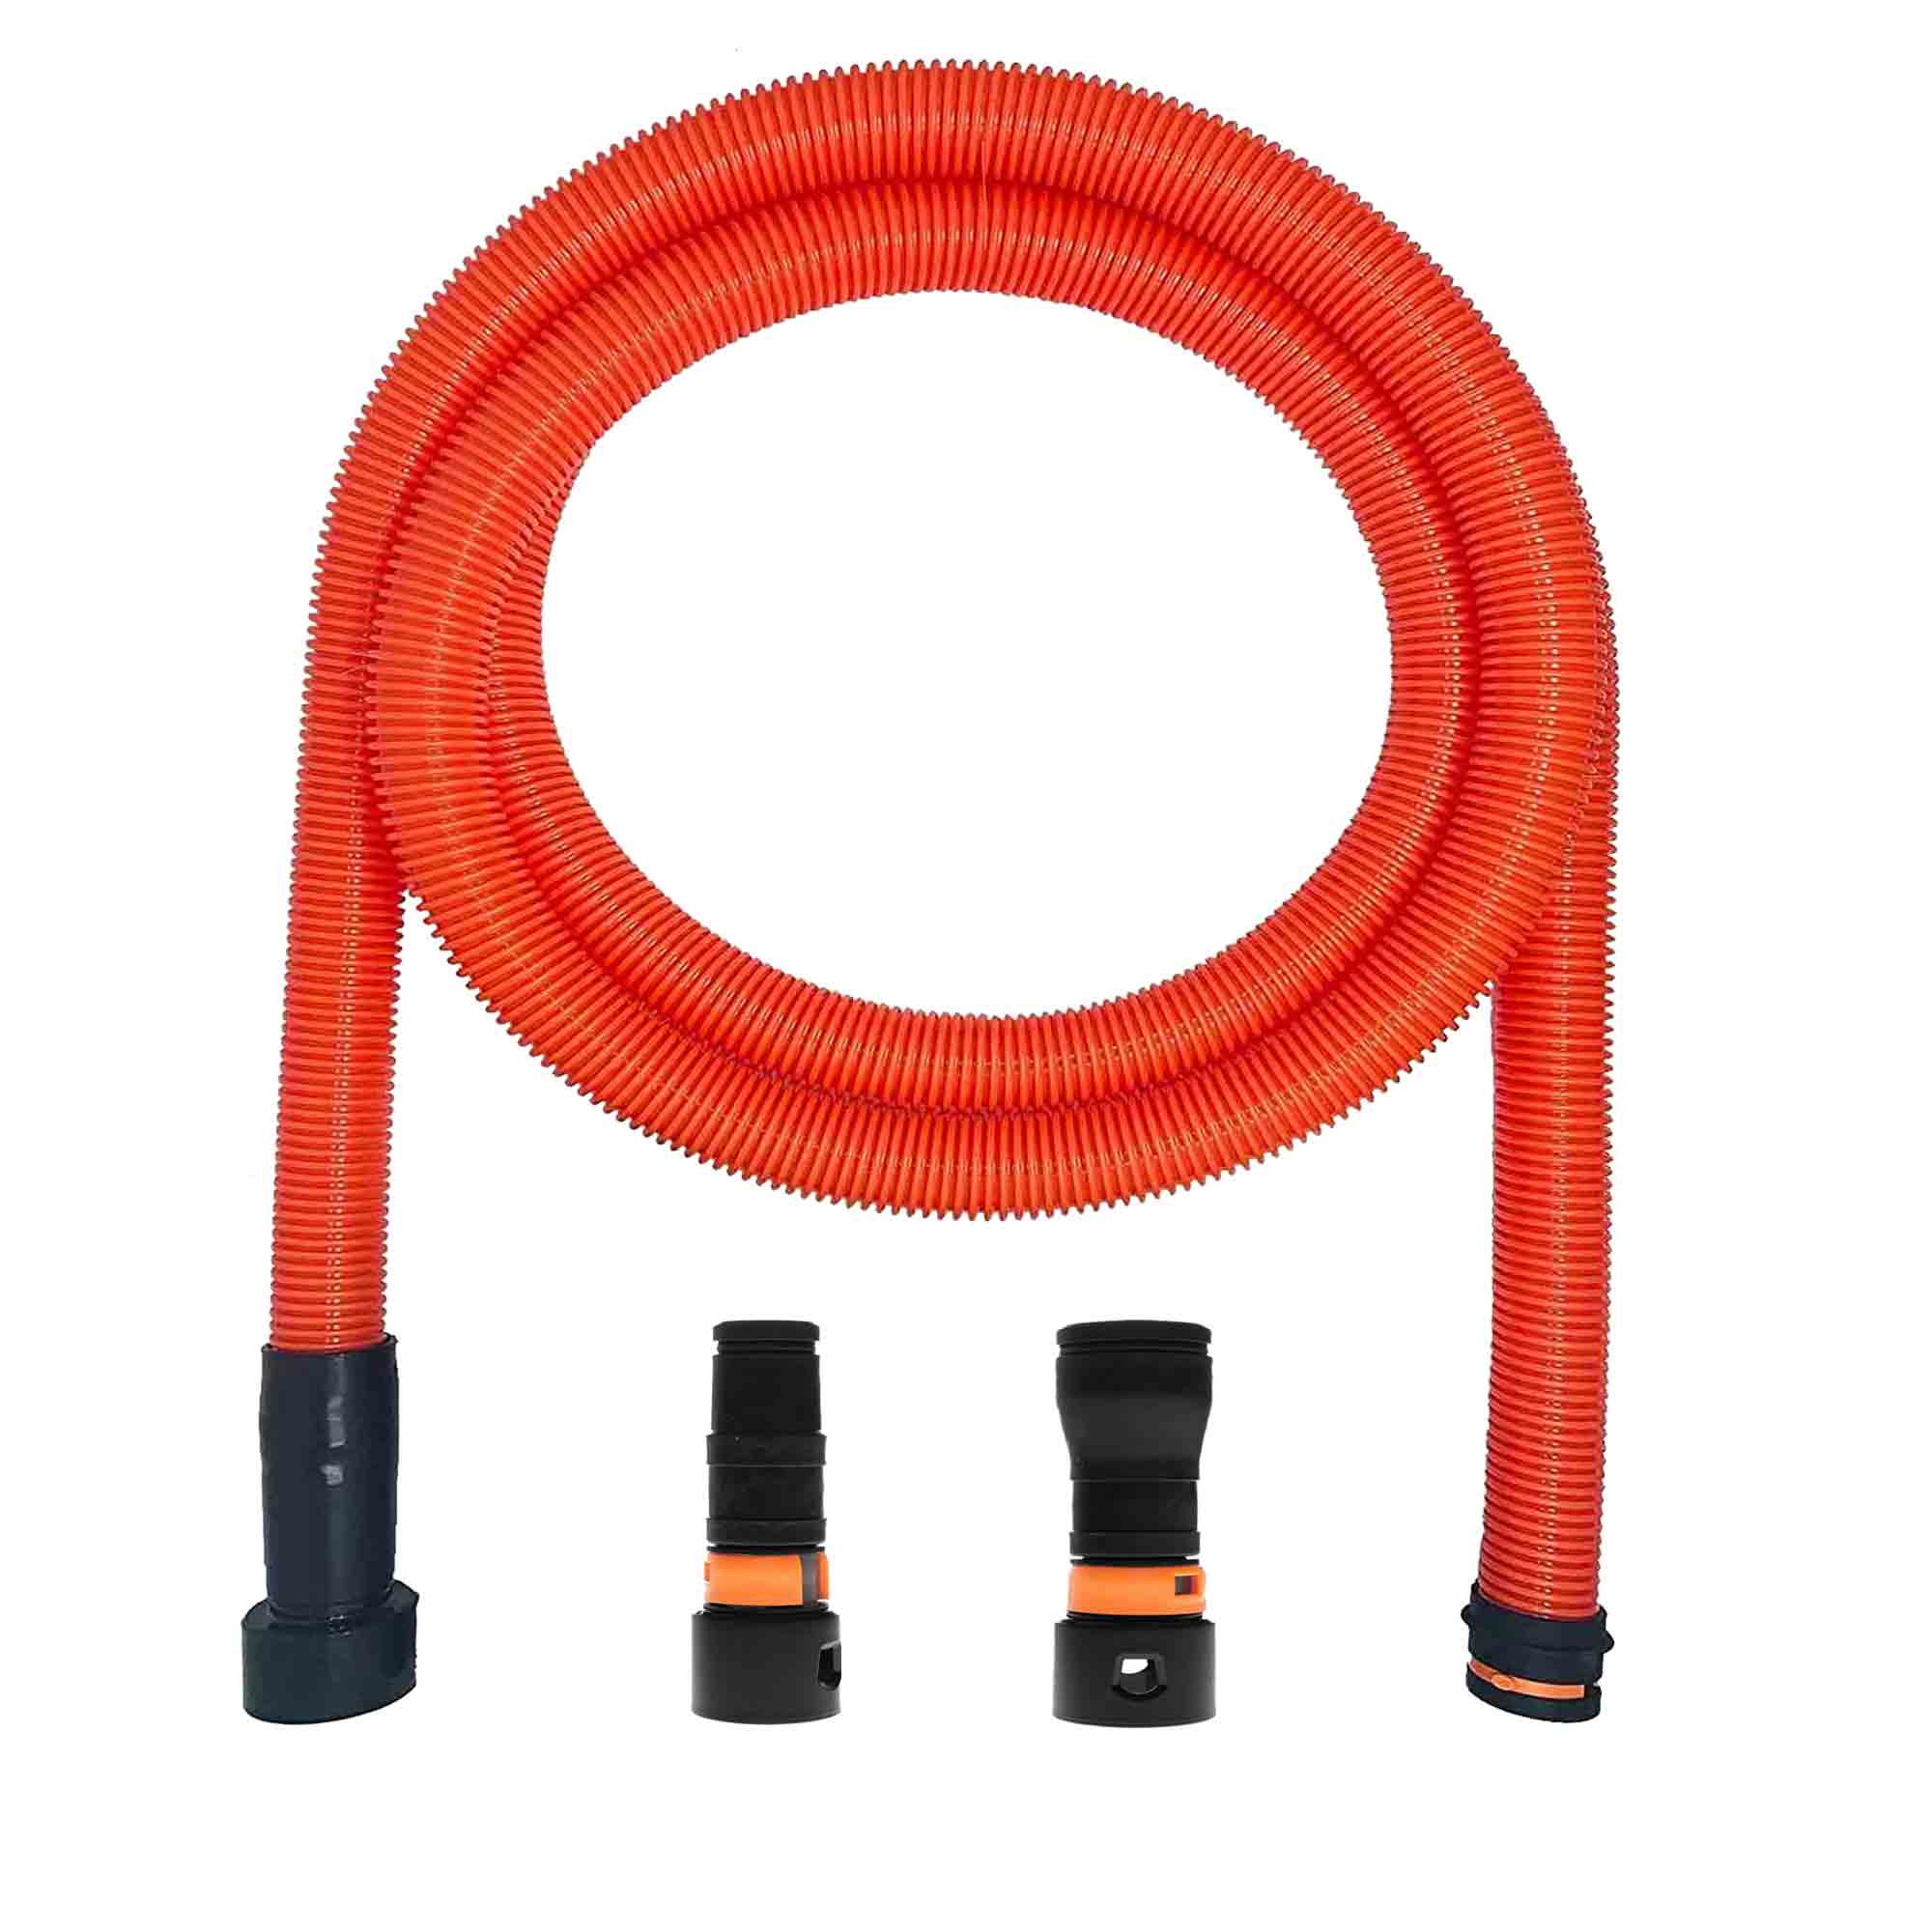 VPC Dust Collection Hose for Home and Shop Vacuums with Power Tool Adapter